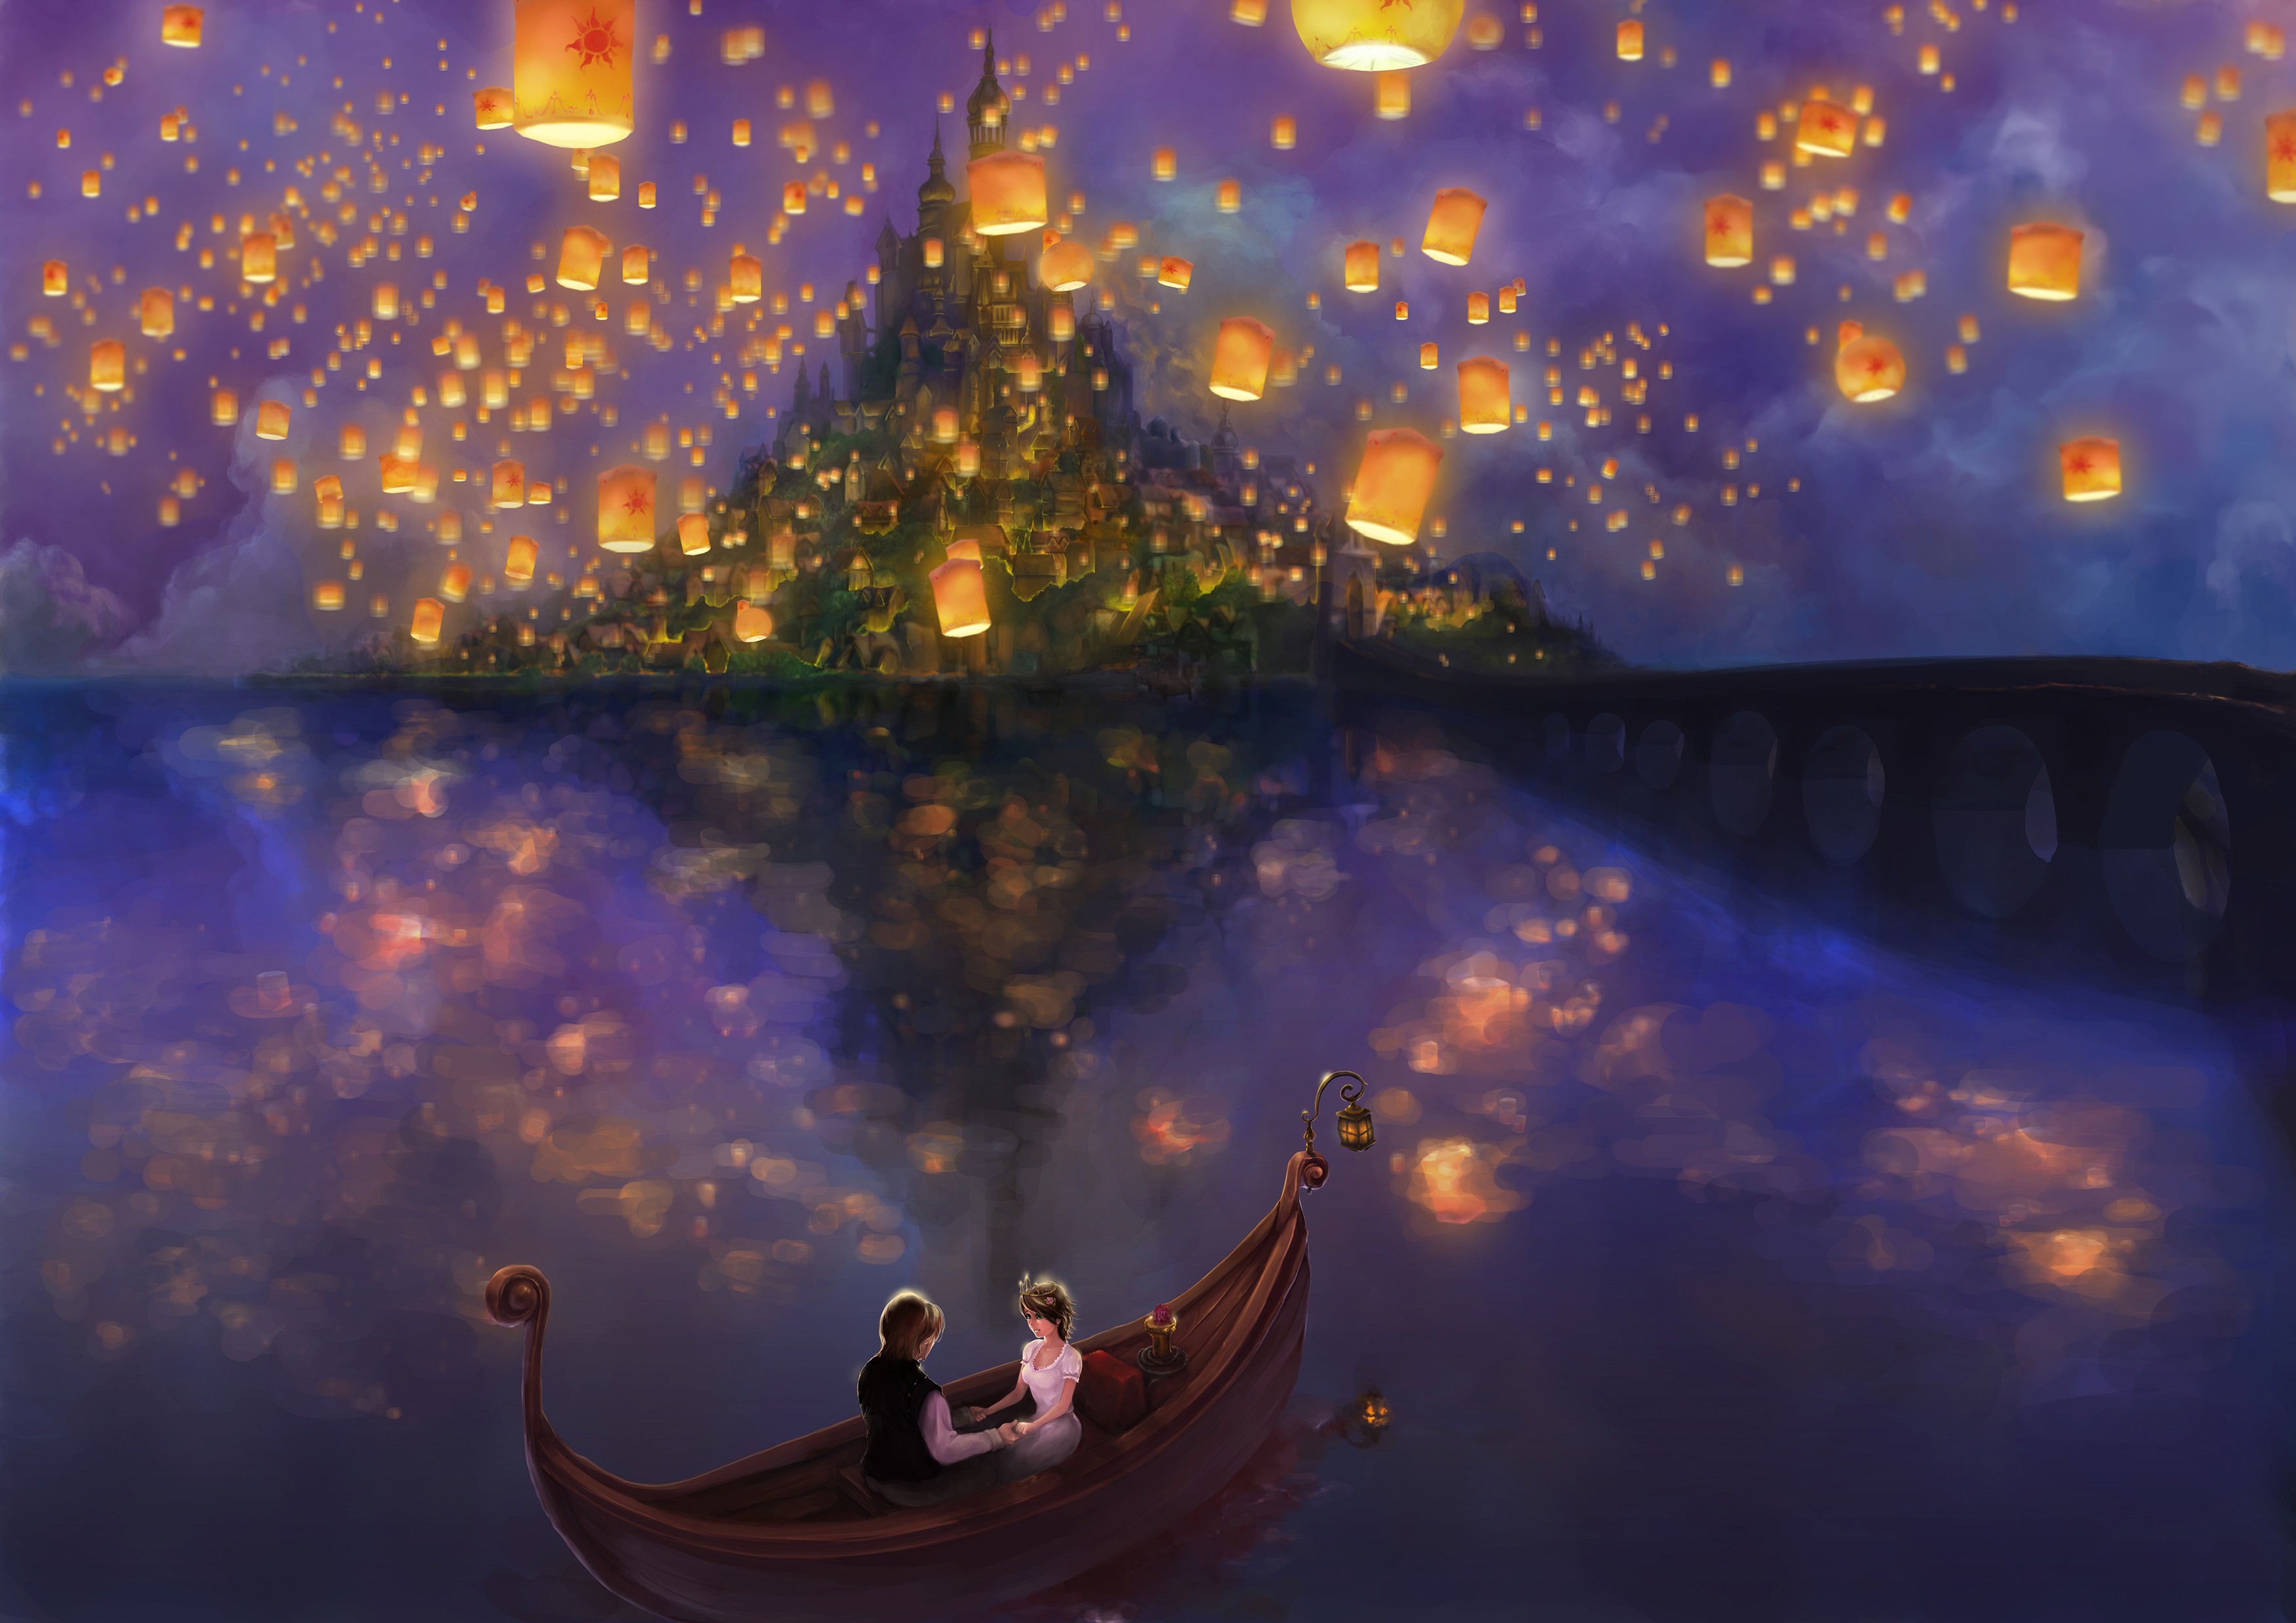 Disney Wallpapers   HD Wallpapers Backgrounds of Your Choice